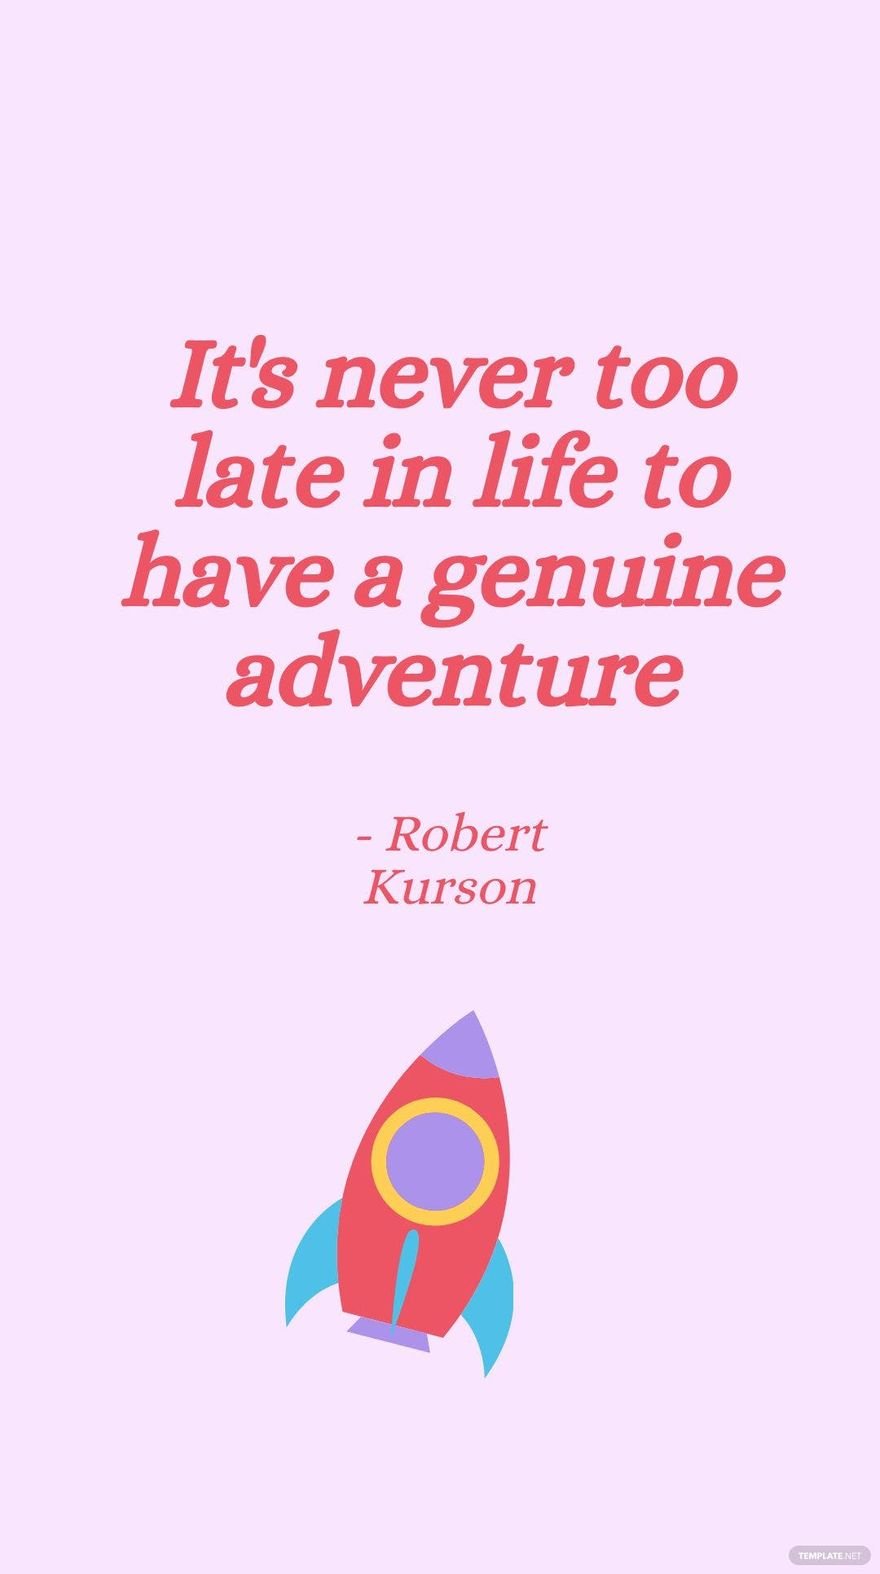 Robert Kurson - It's never too late in life to have a genuine adventure in JPG